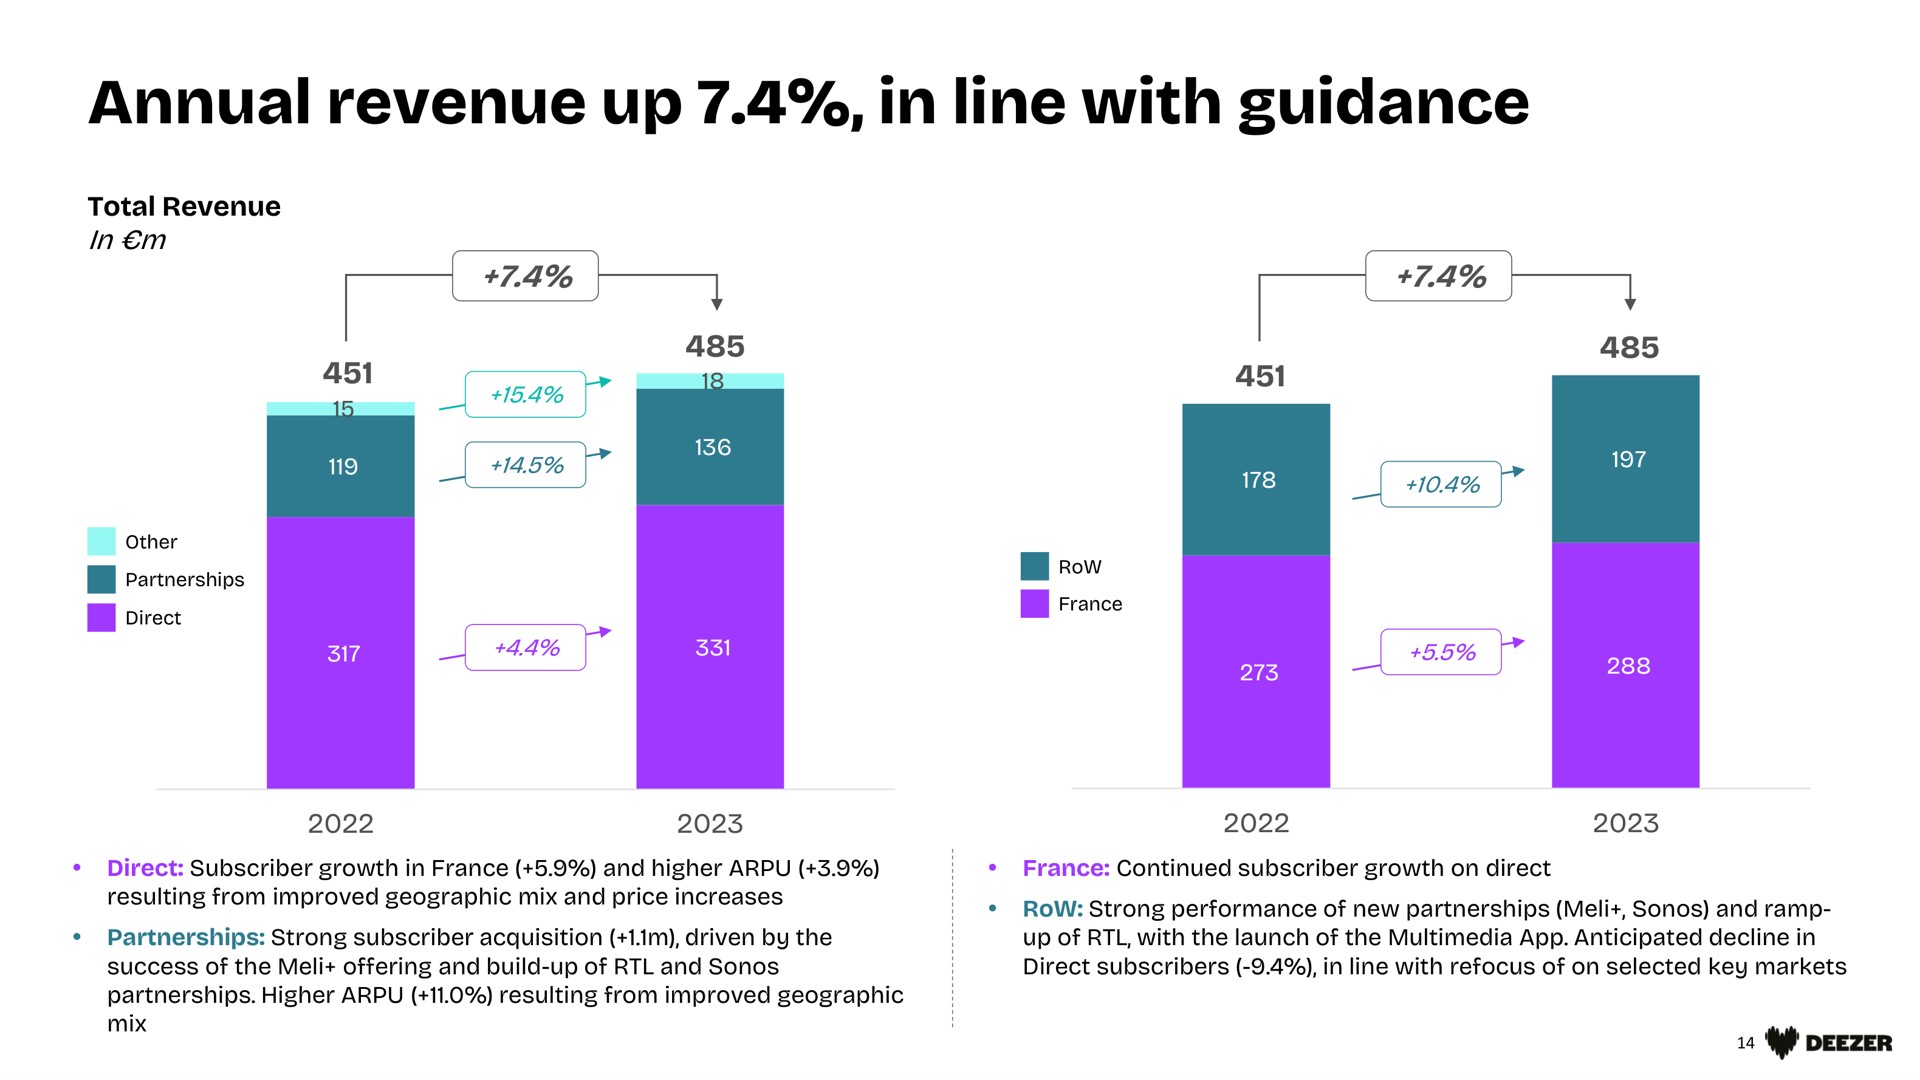 annual revenue up in line with guidance | Deezer